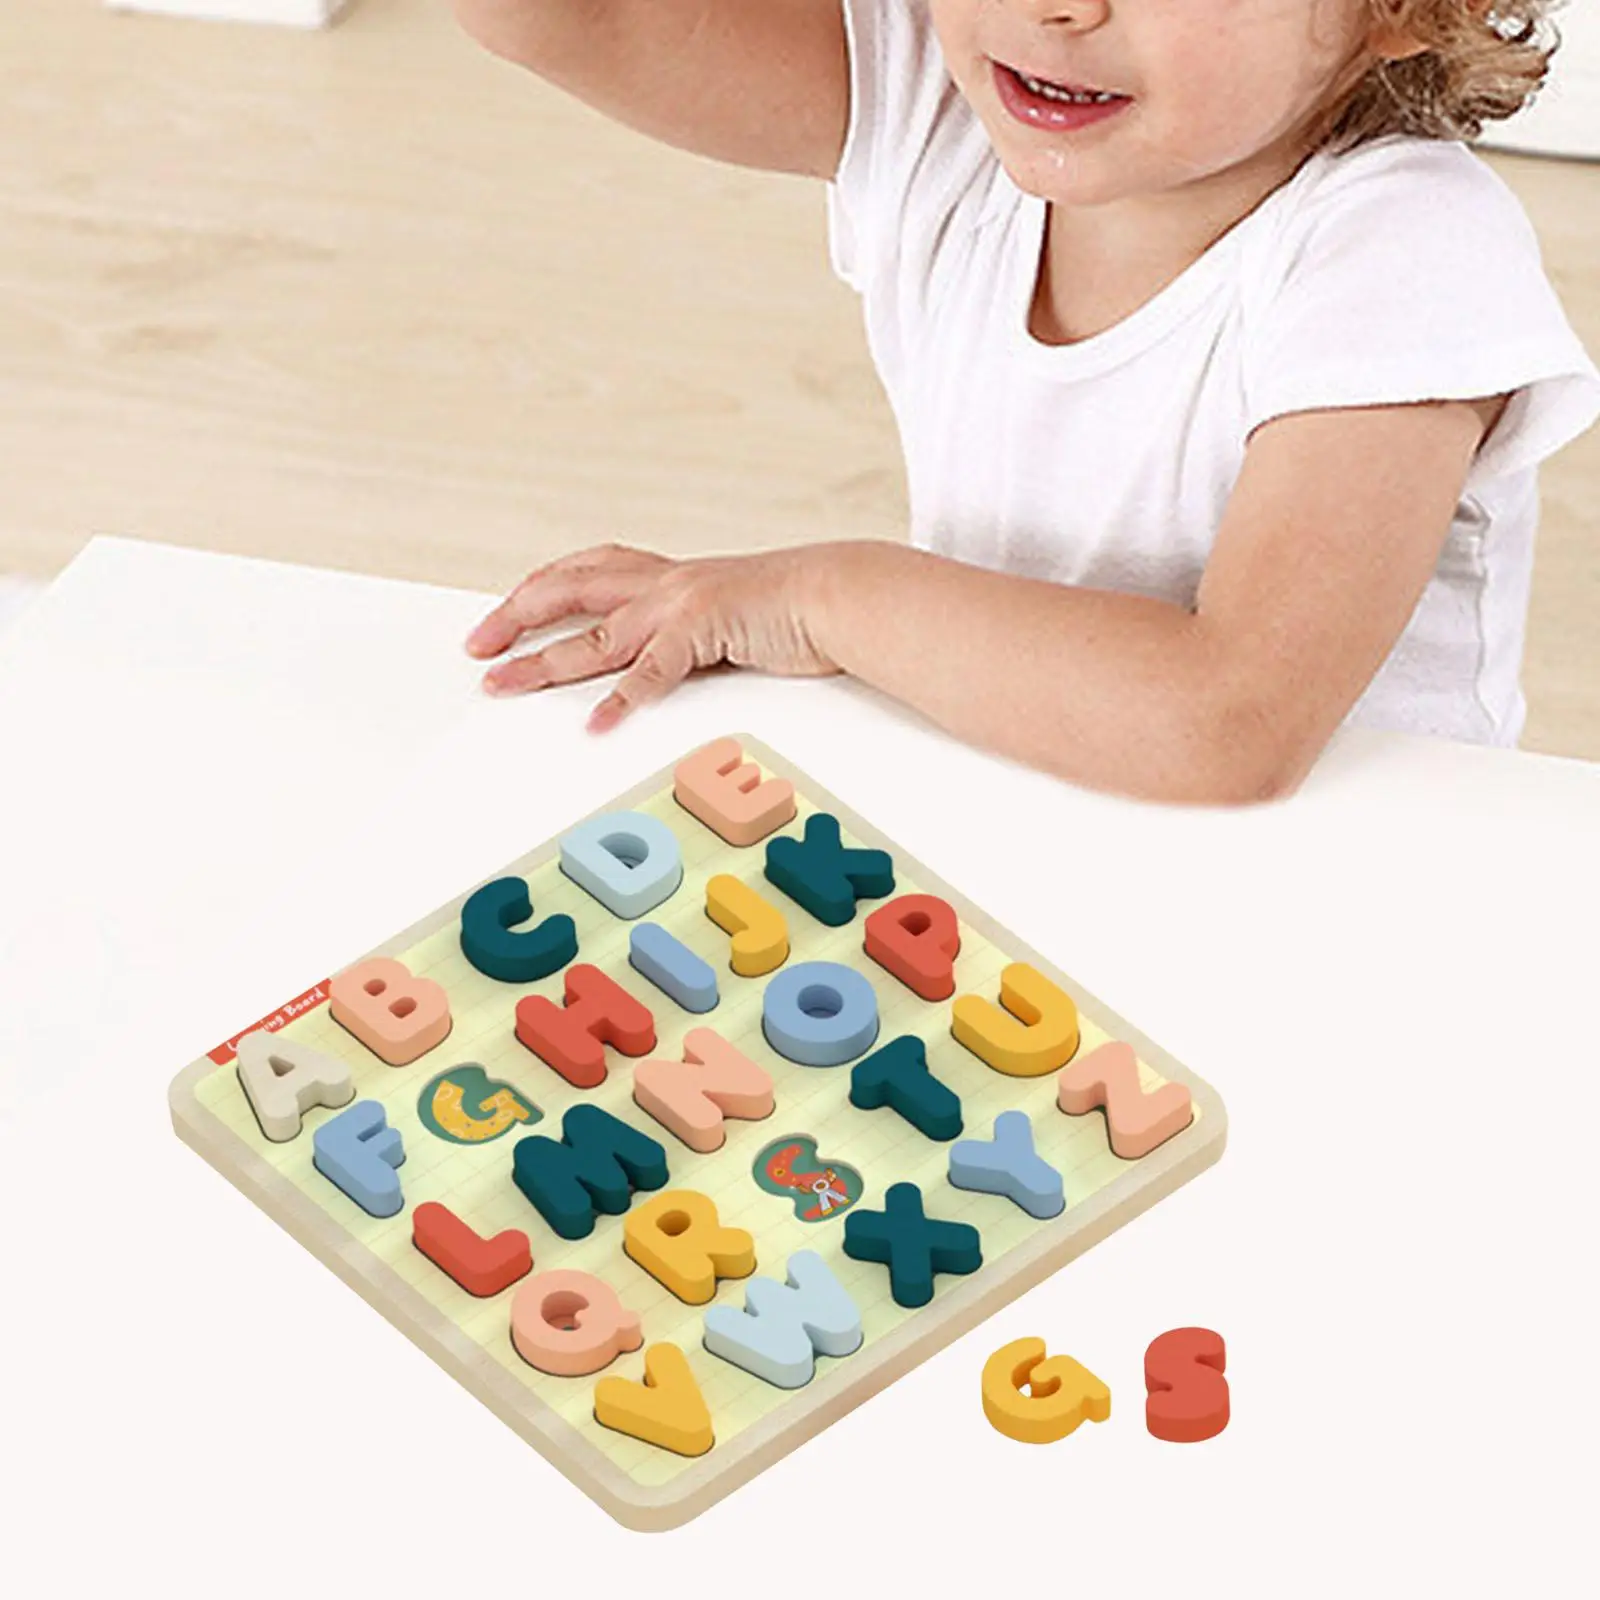 Wooden Puzzle Matching Game Chunky letters Puzzles Board for Preschool